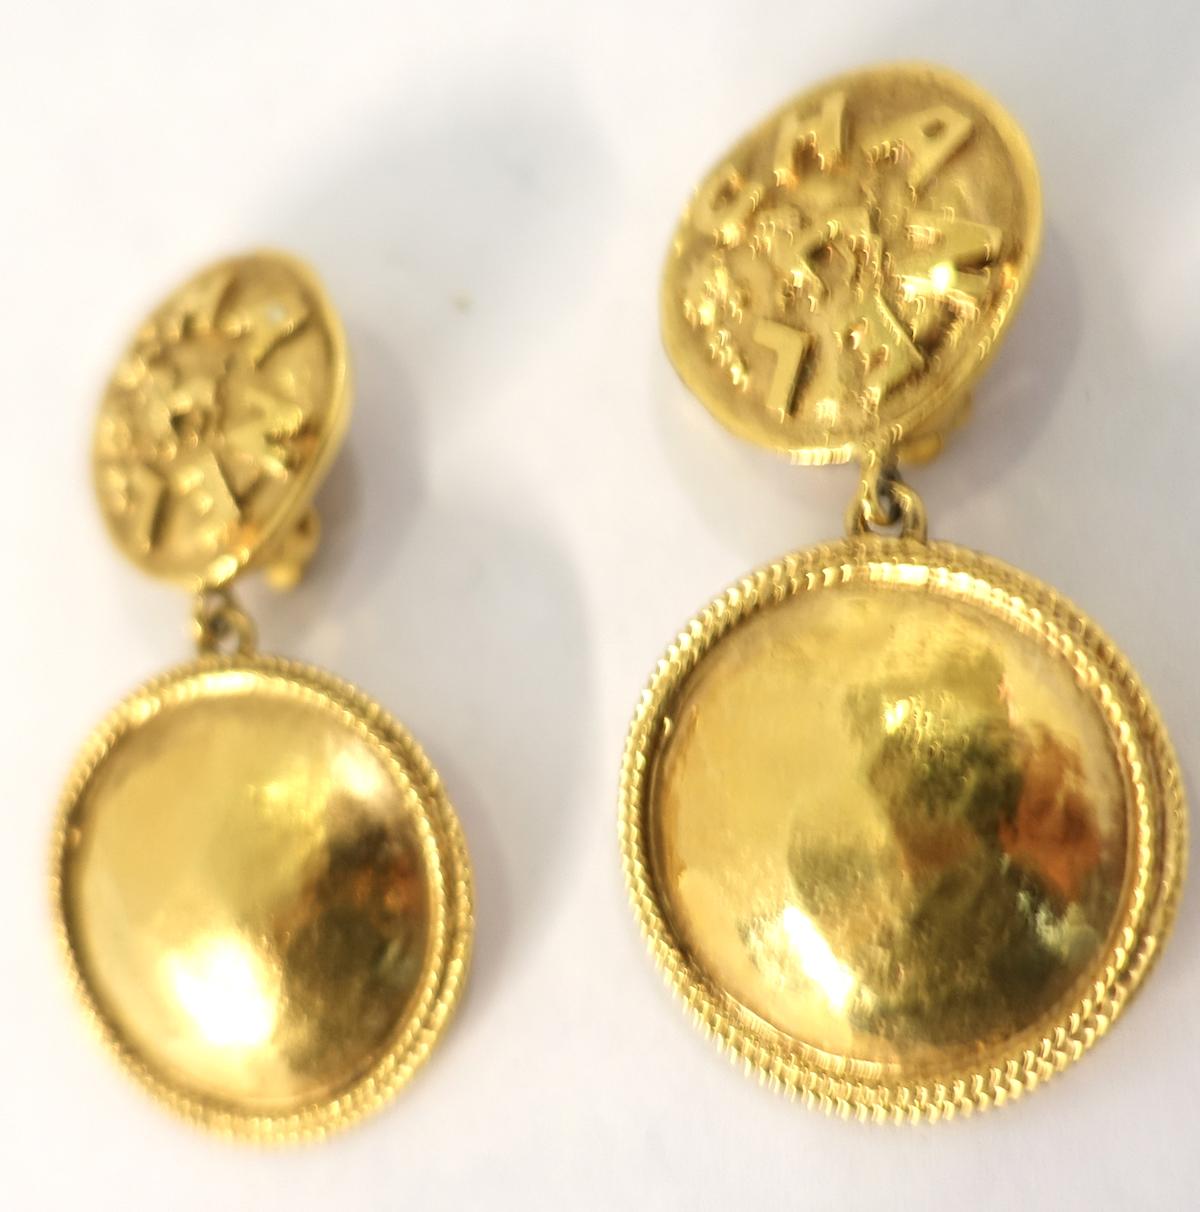 Vintage Signed Chanel 23 Drop Earrings In Good Condition For Sale In New York, NY